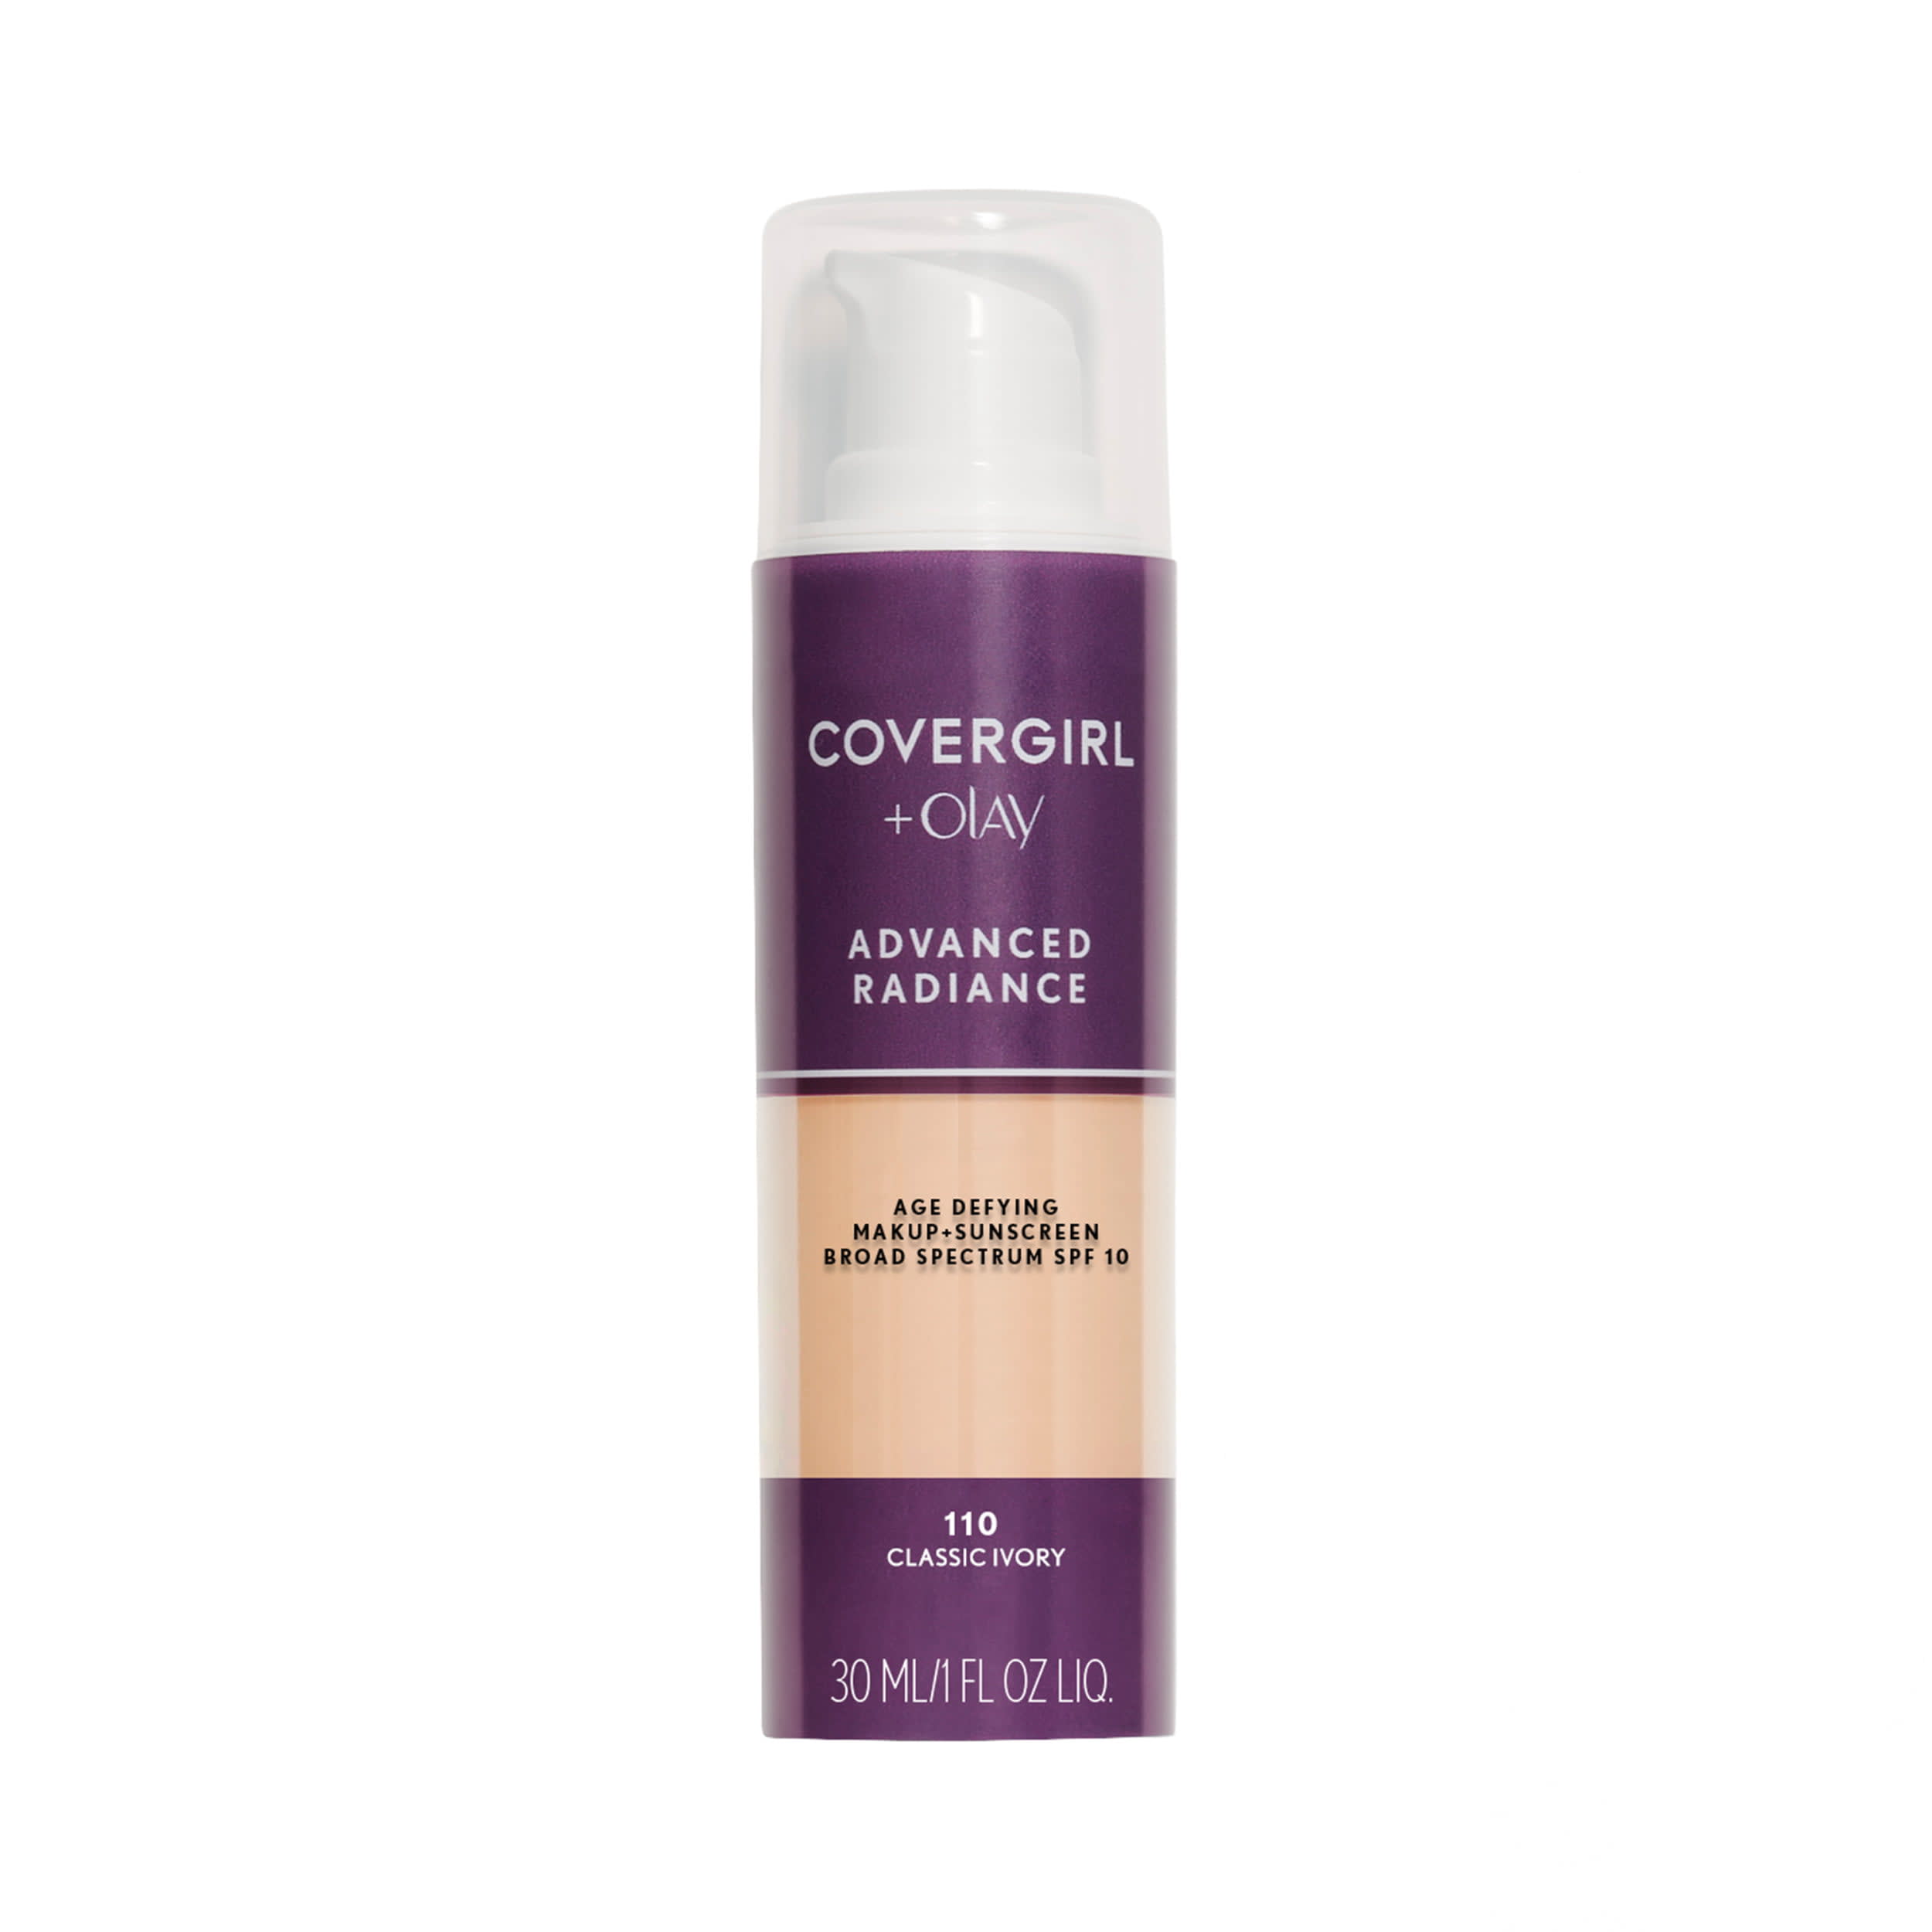 Perfector Rewind DroneUp - oz Glow Age Instant Instant 0.68 Light, Fair/ Maybelline Makeup, Delivery 4-In-1 fl